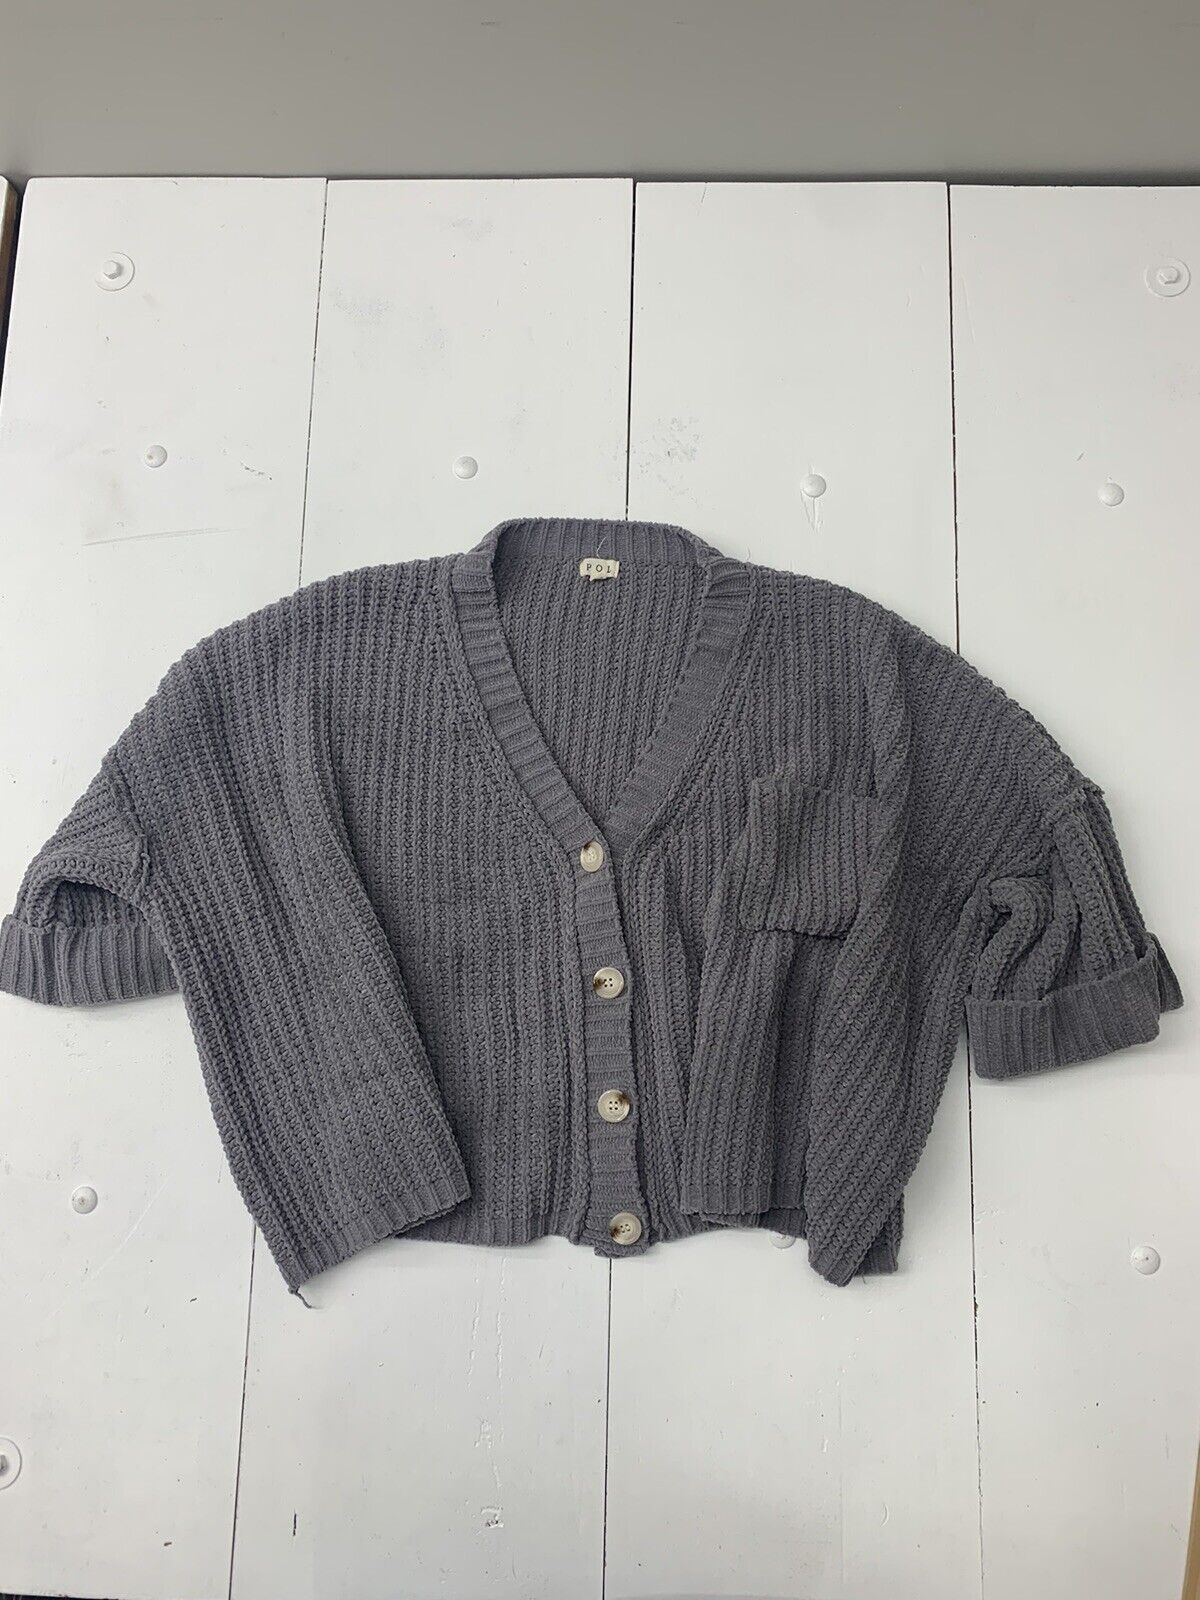 KNIT SWEATER - Mid-gray